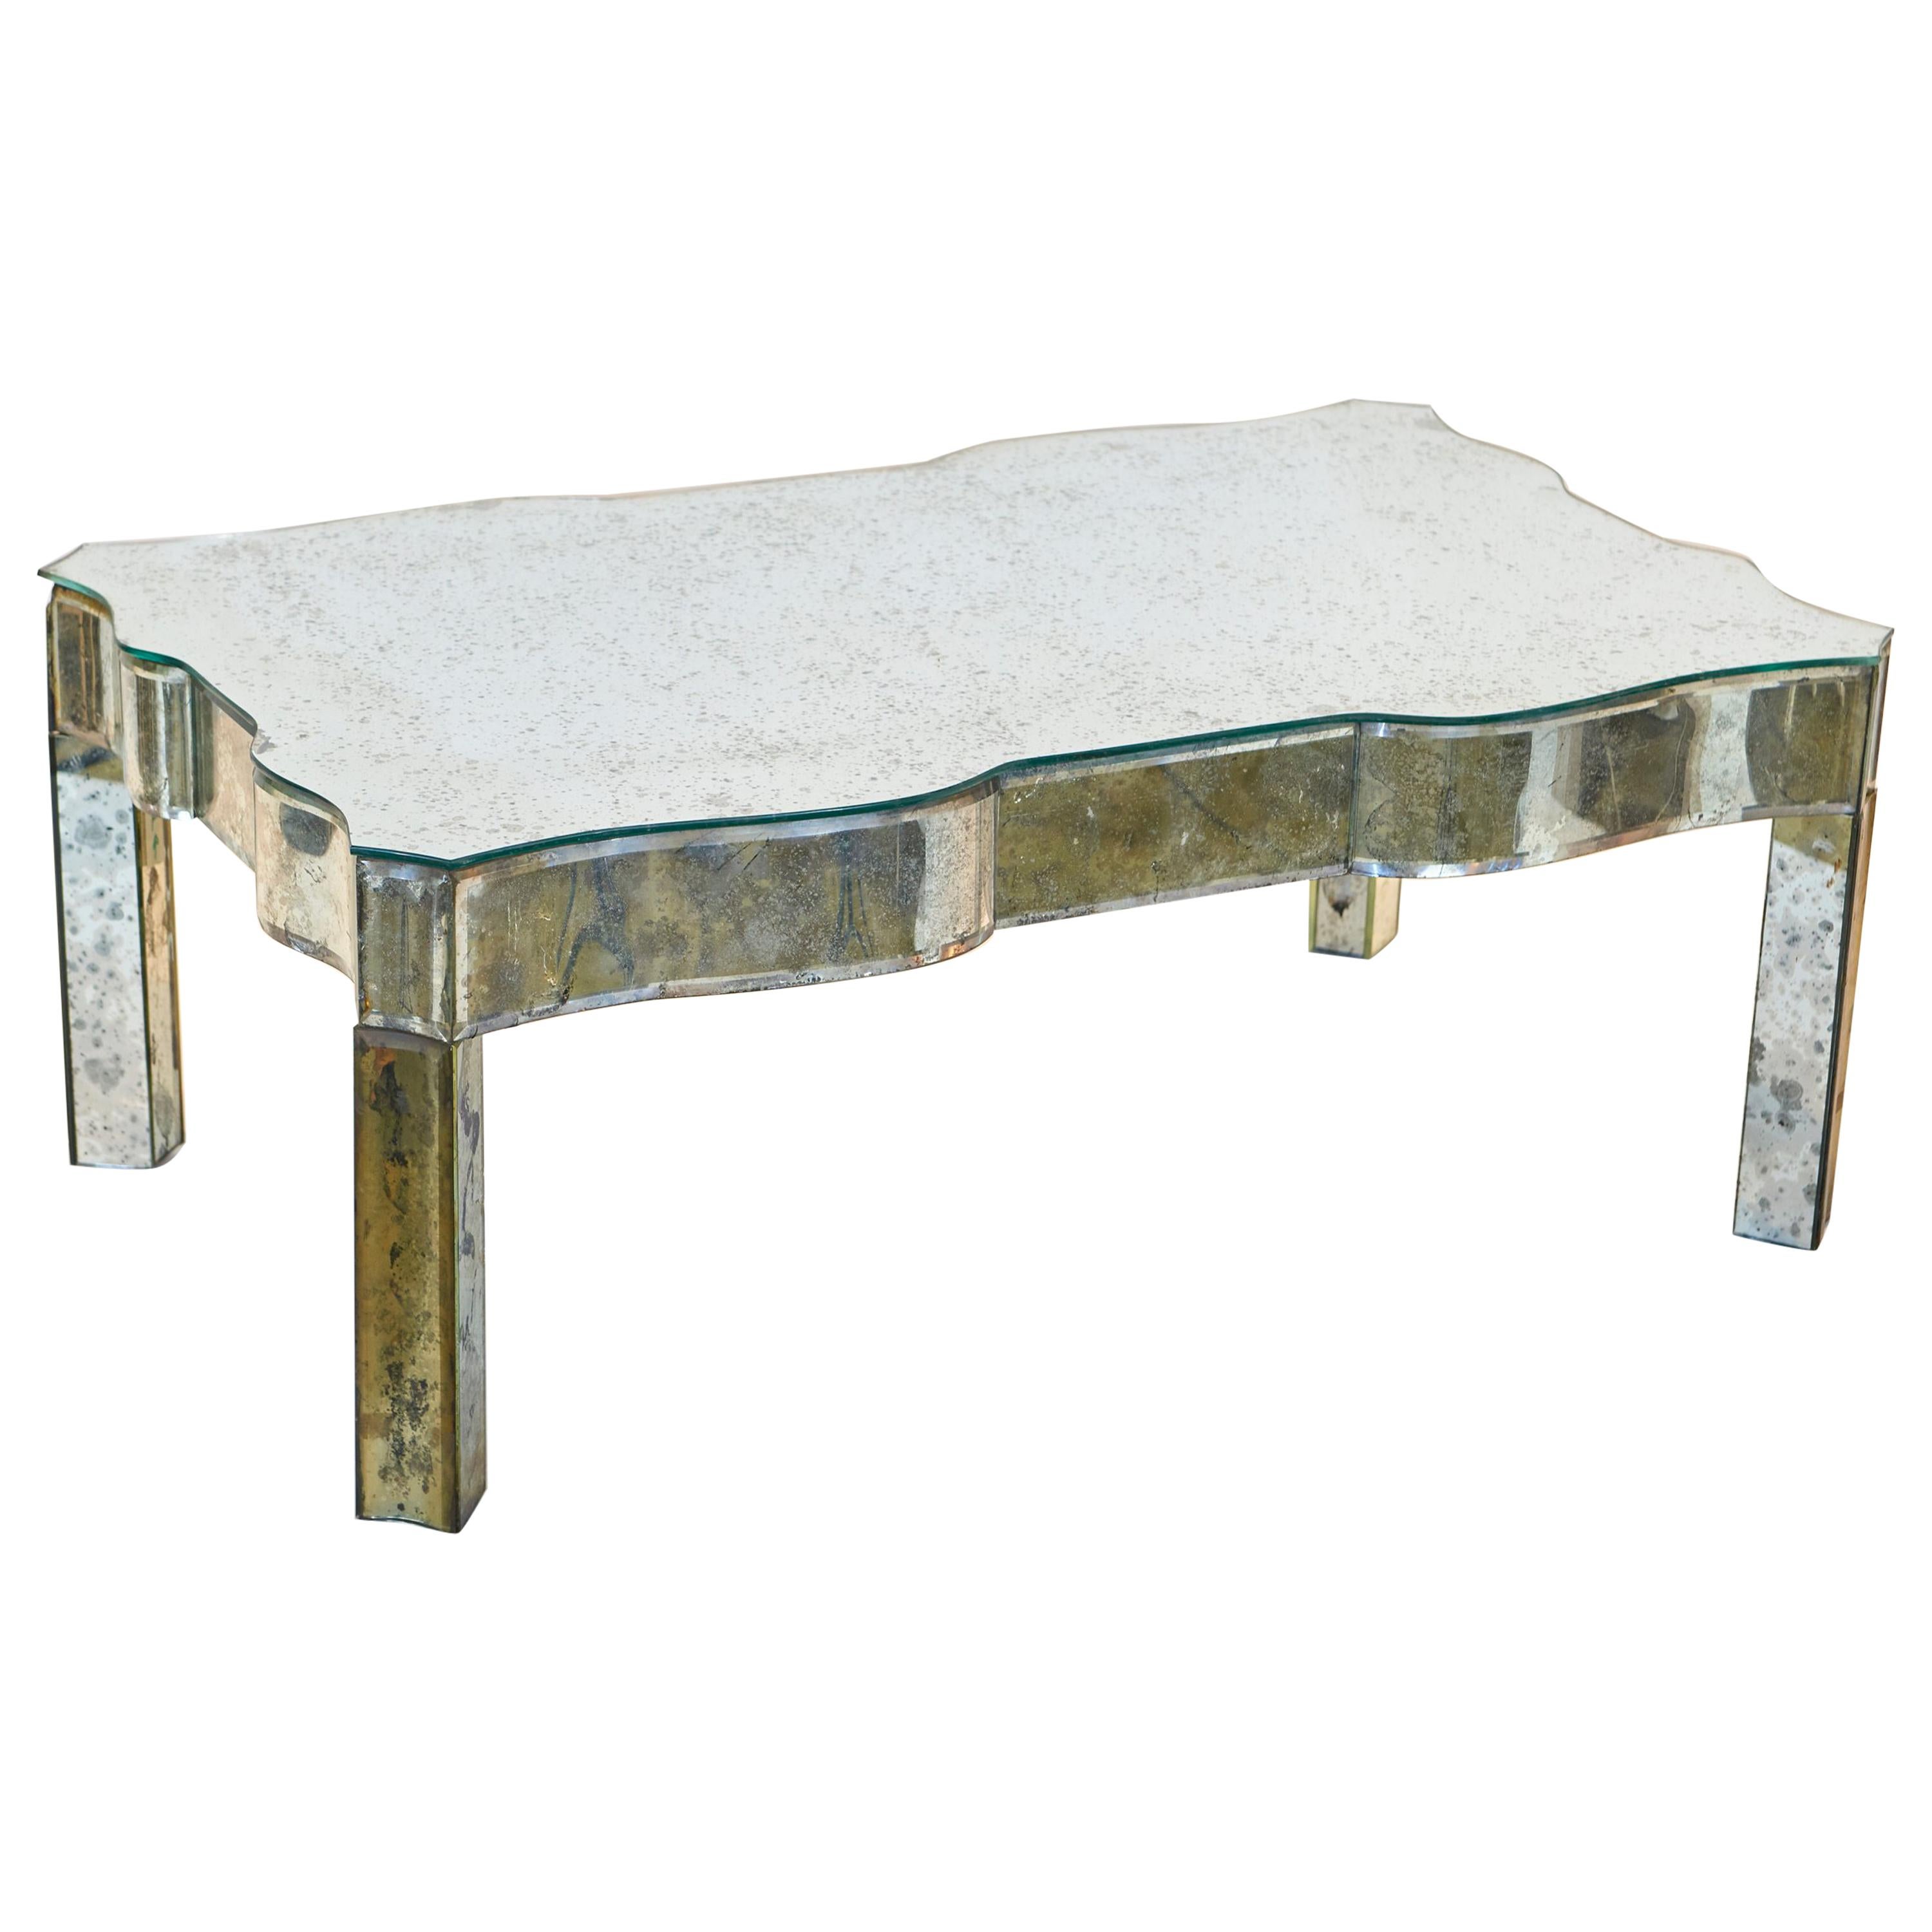 Samuel Marx Serpentine Mirrored Cocktail Table For Sale